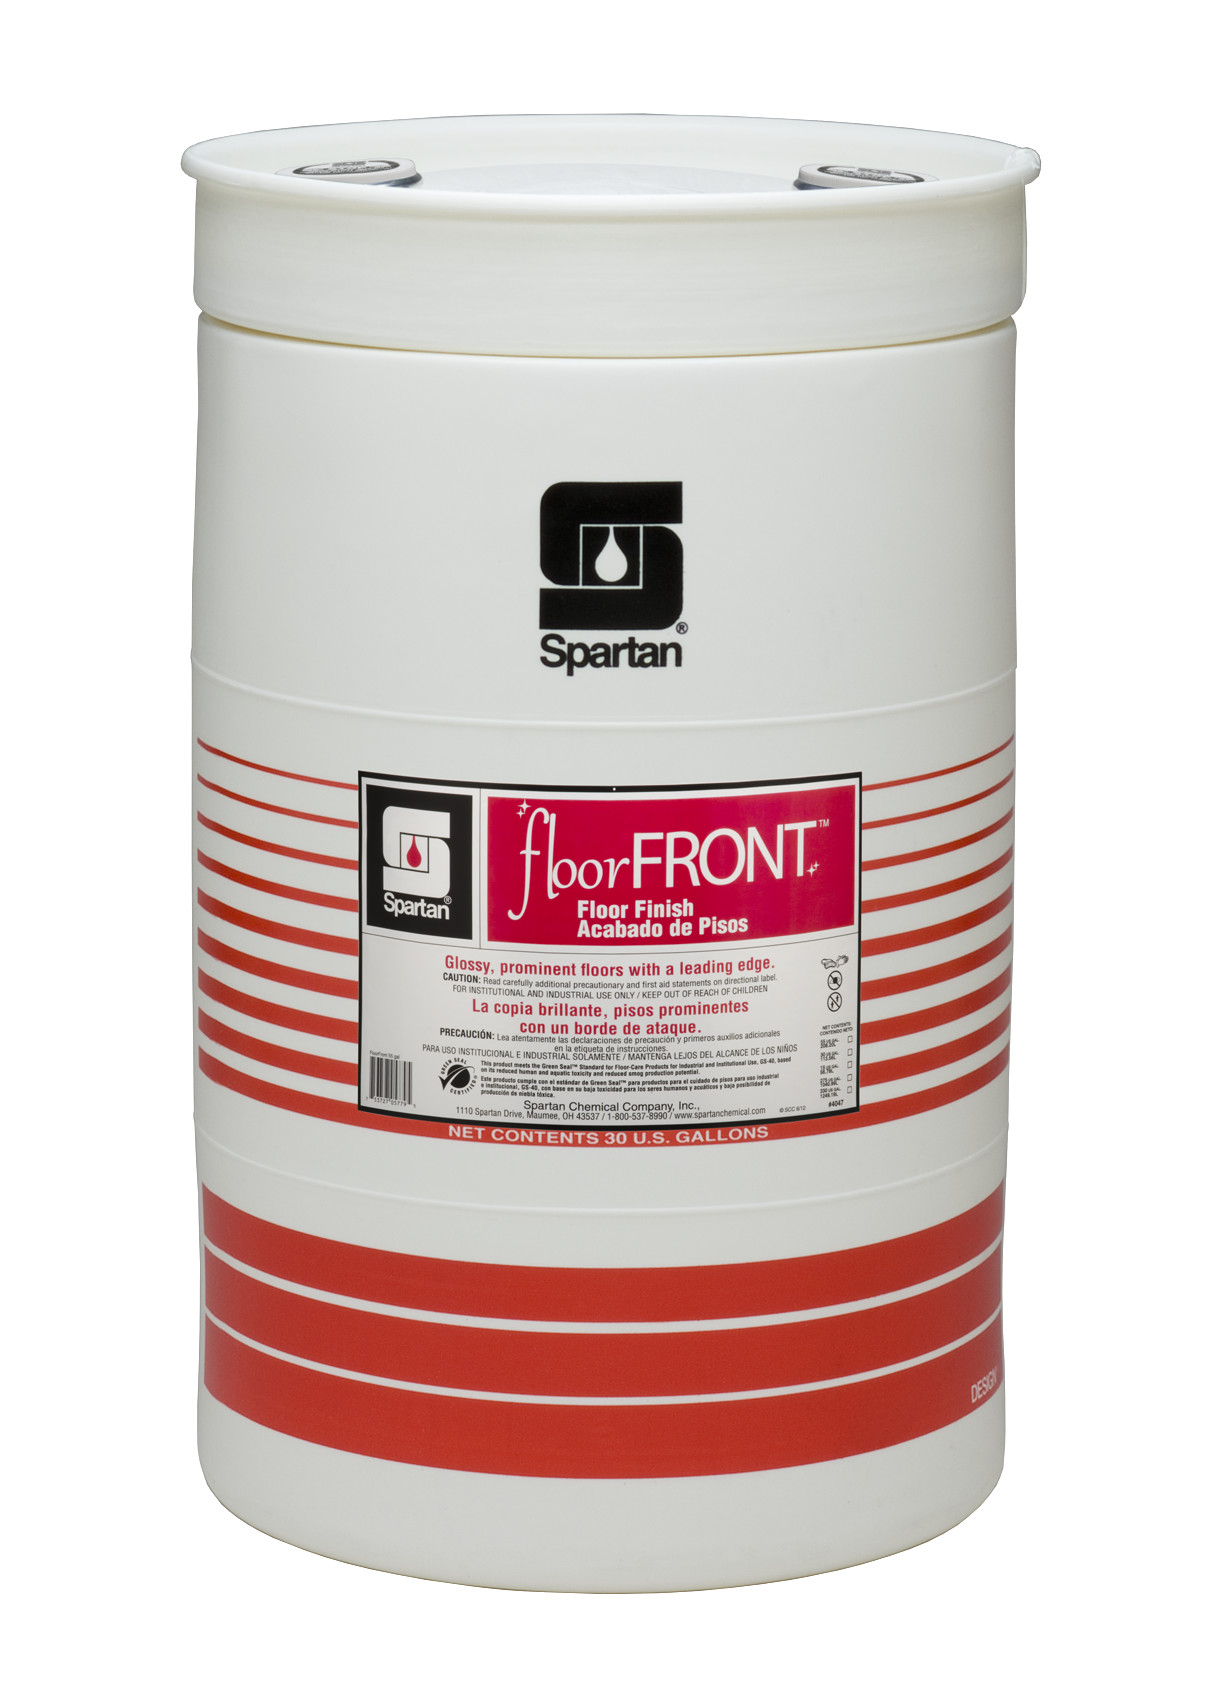 Spartan Chemical Company FloorFront, 30 GAL DRUM